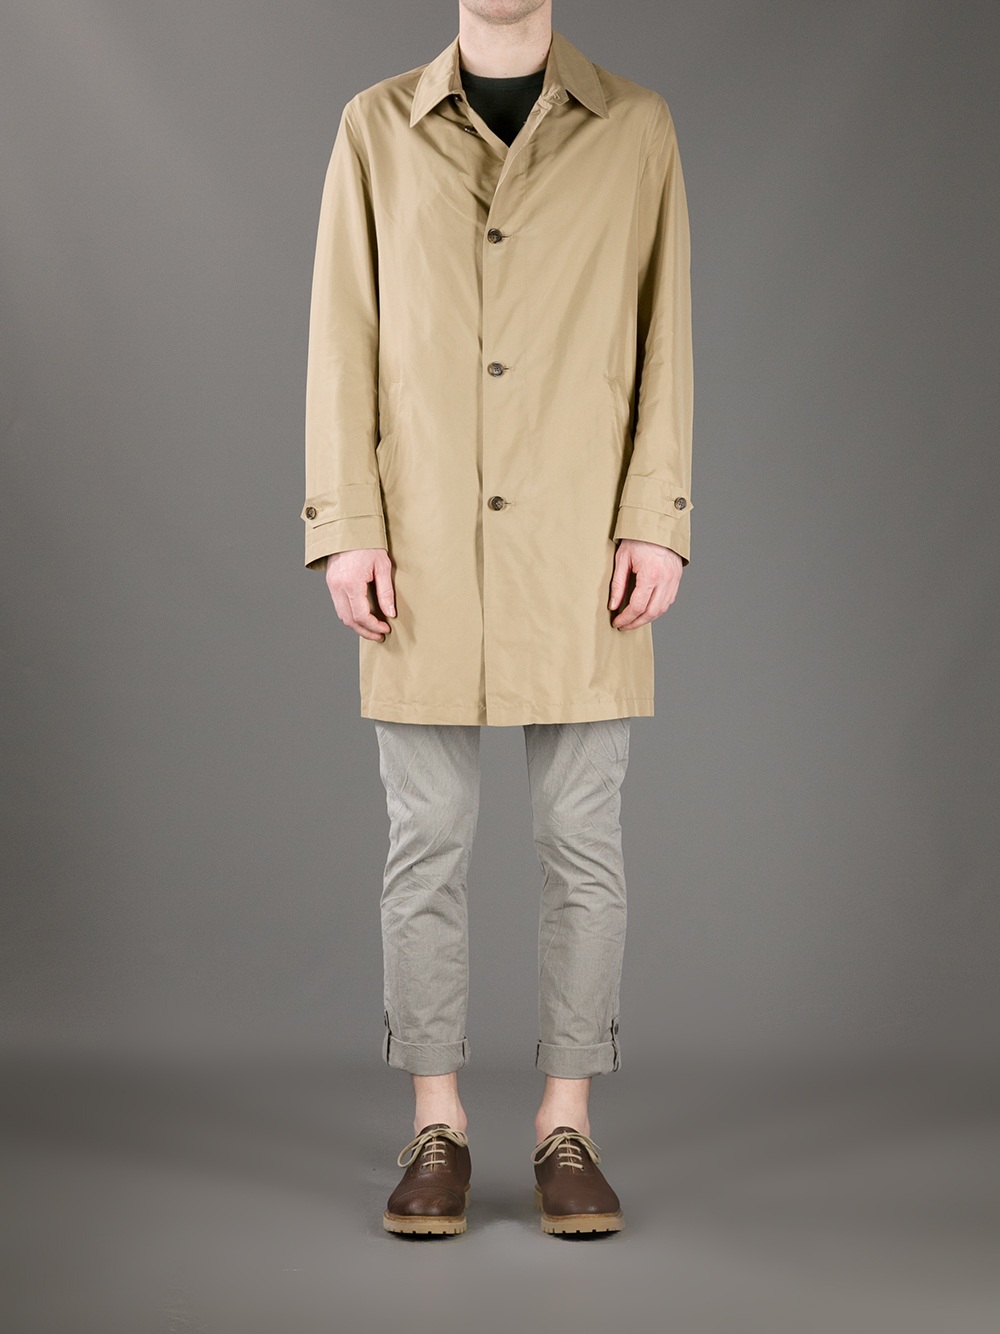 Brooks Brothers Waterproof Trench Coat in Brown (Natural) for Men - Lyst